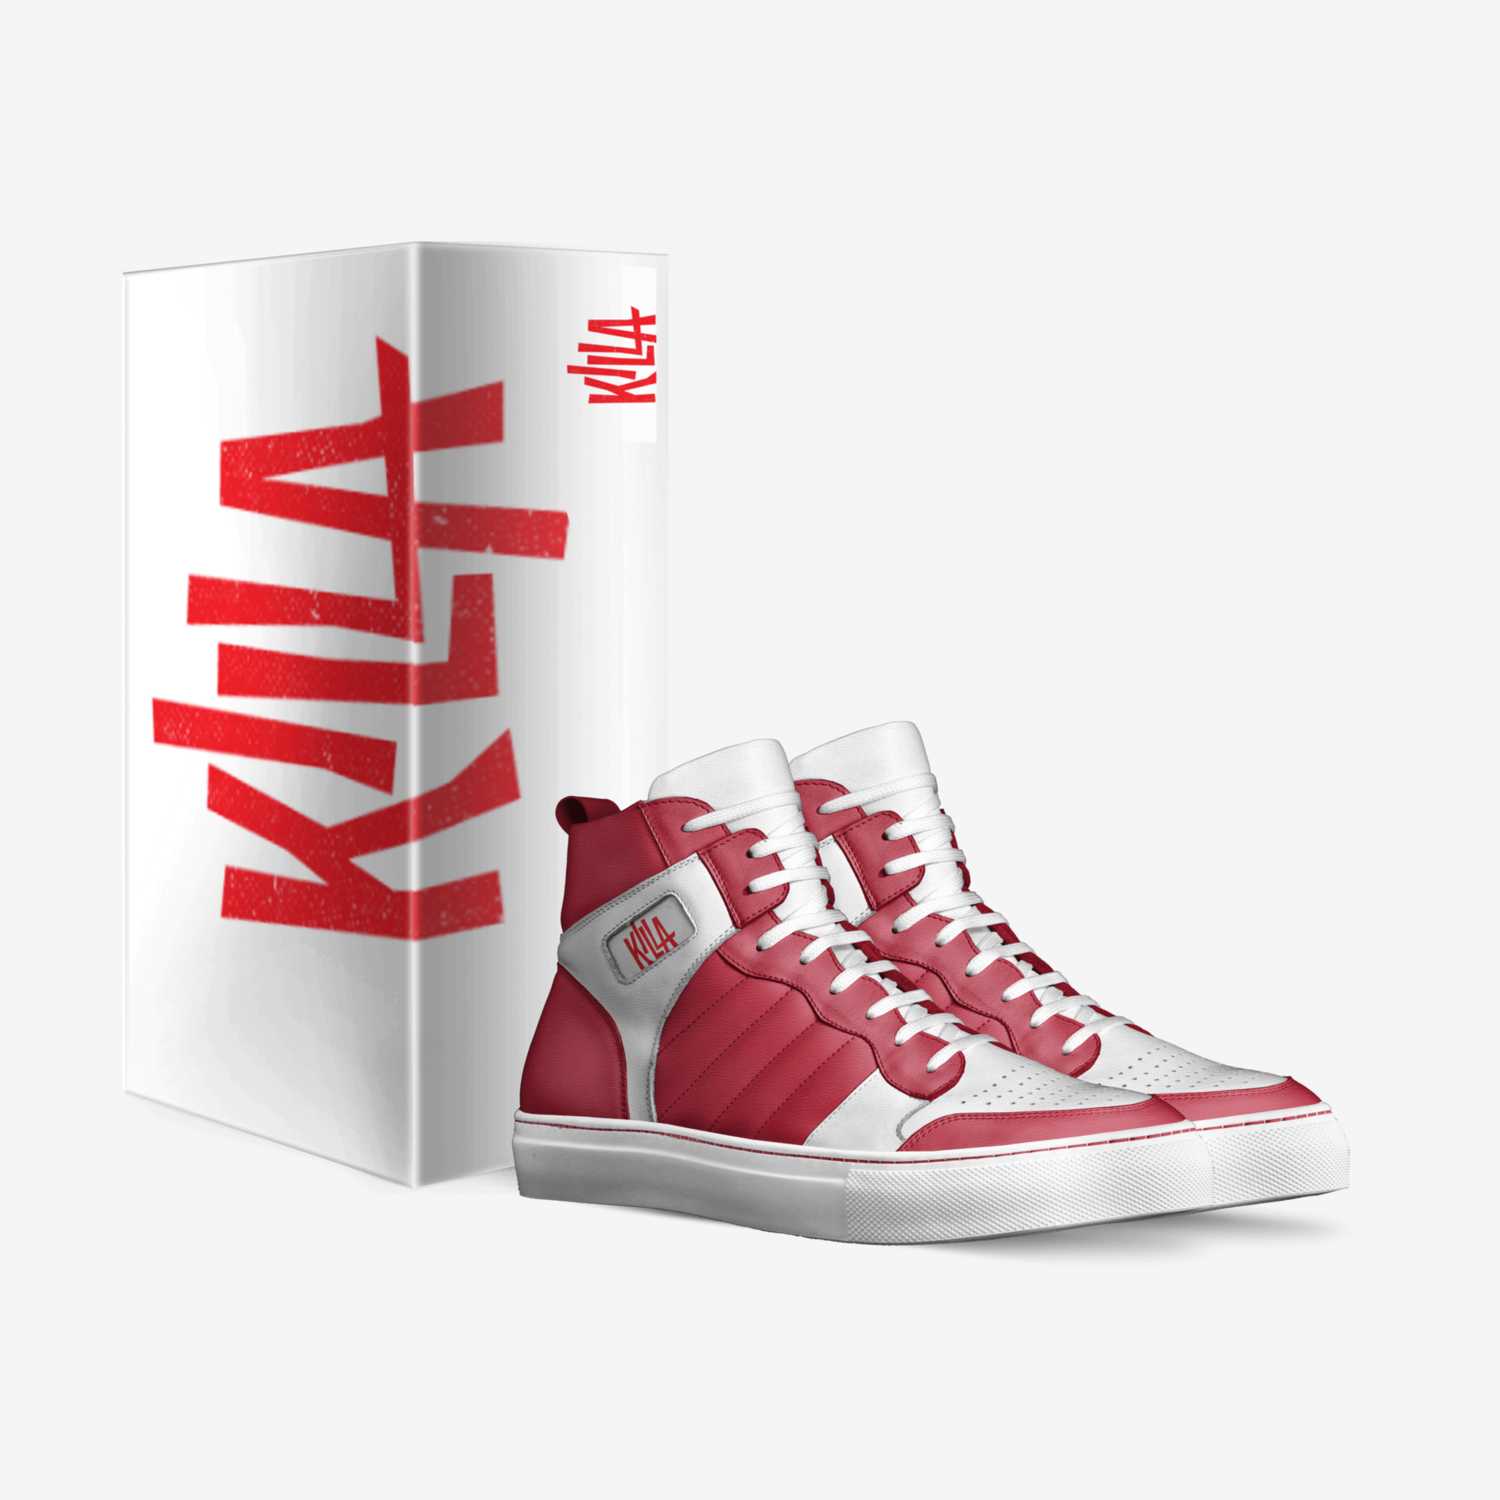 Killa custom made in Italy shoes by Knowledgejuelzbrown | Box view